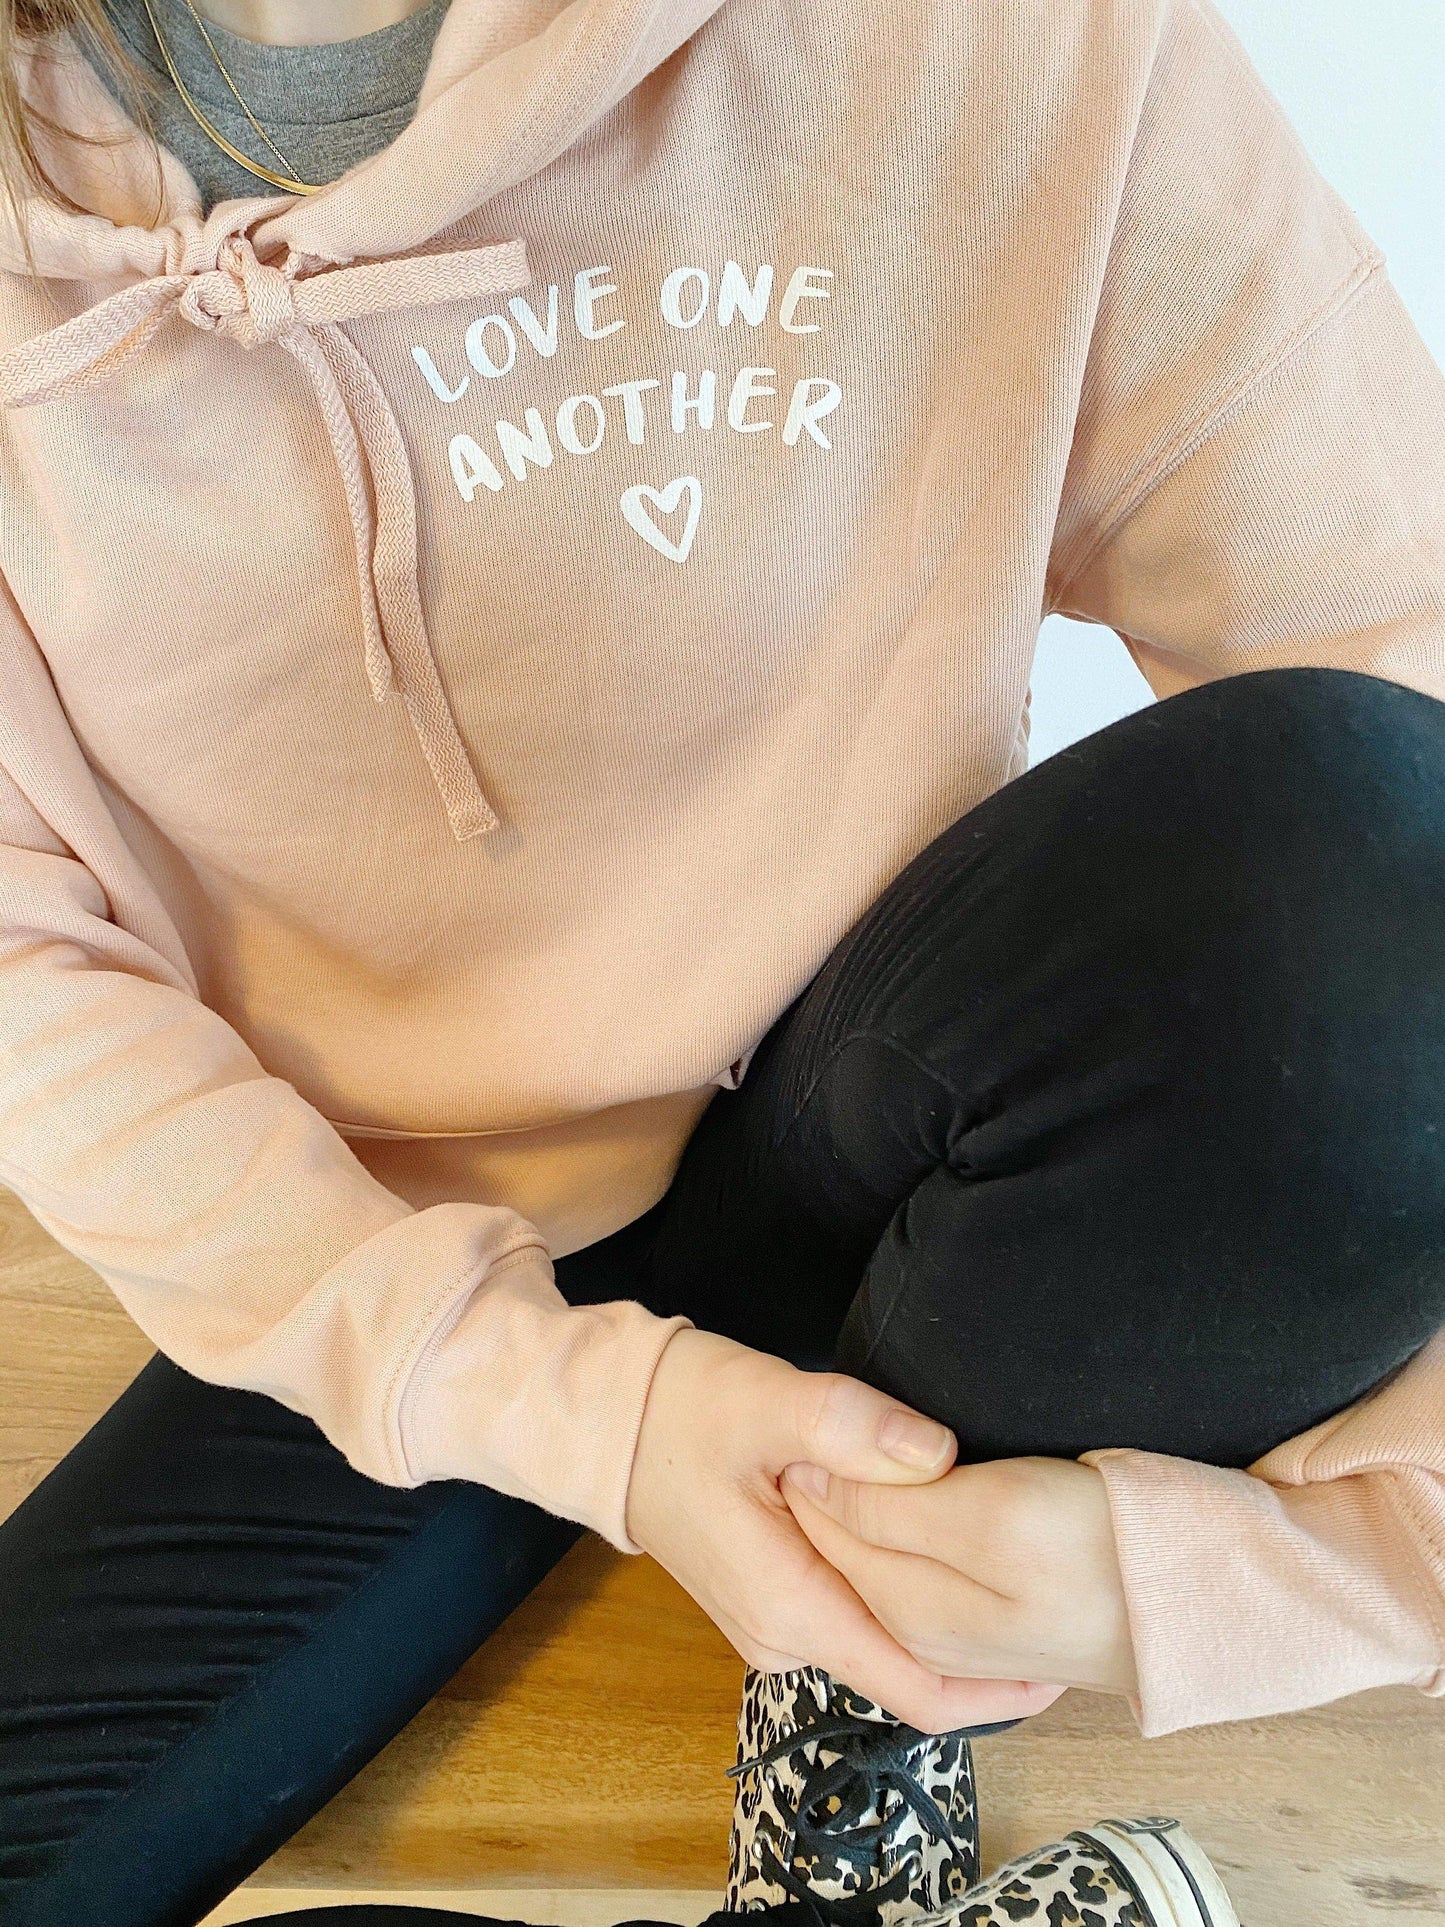 CLEARANCE!! Love One Another Sweatshirt -  Peach